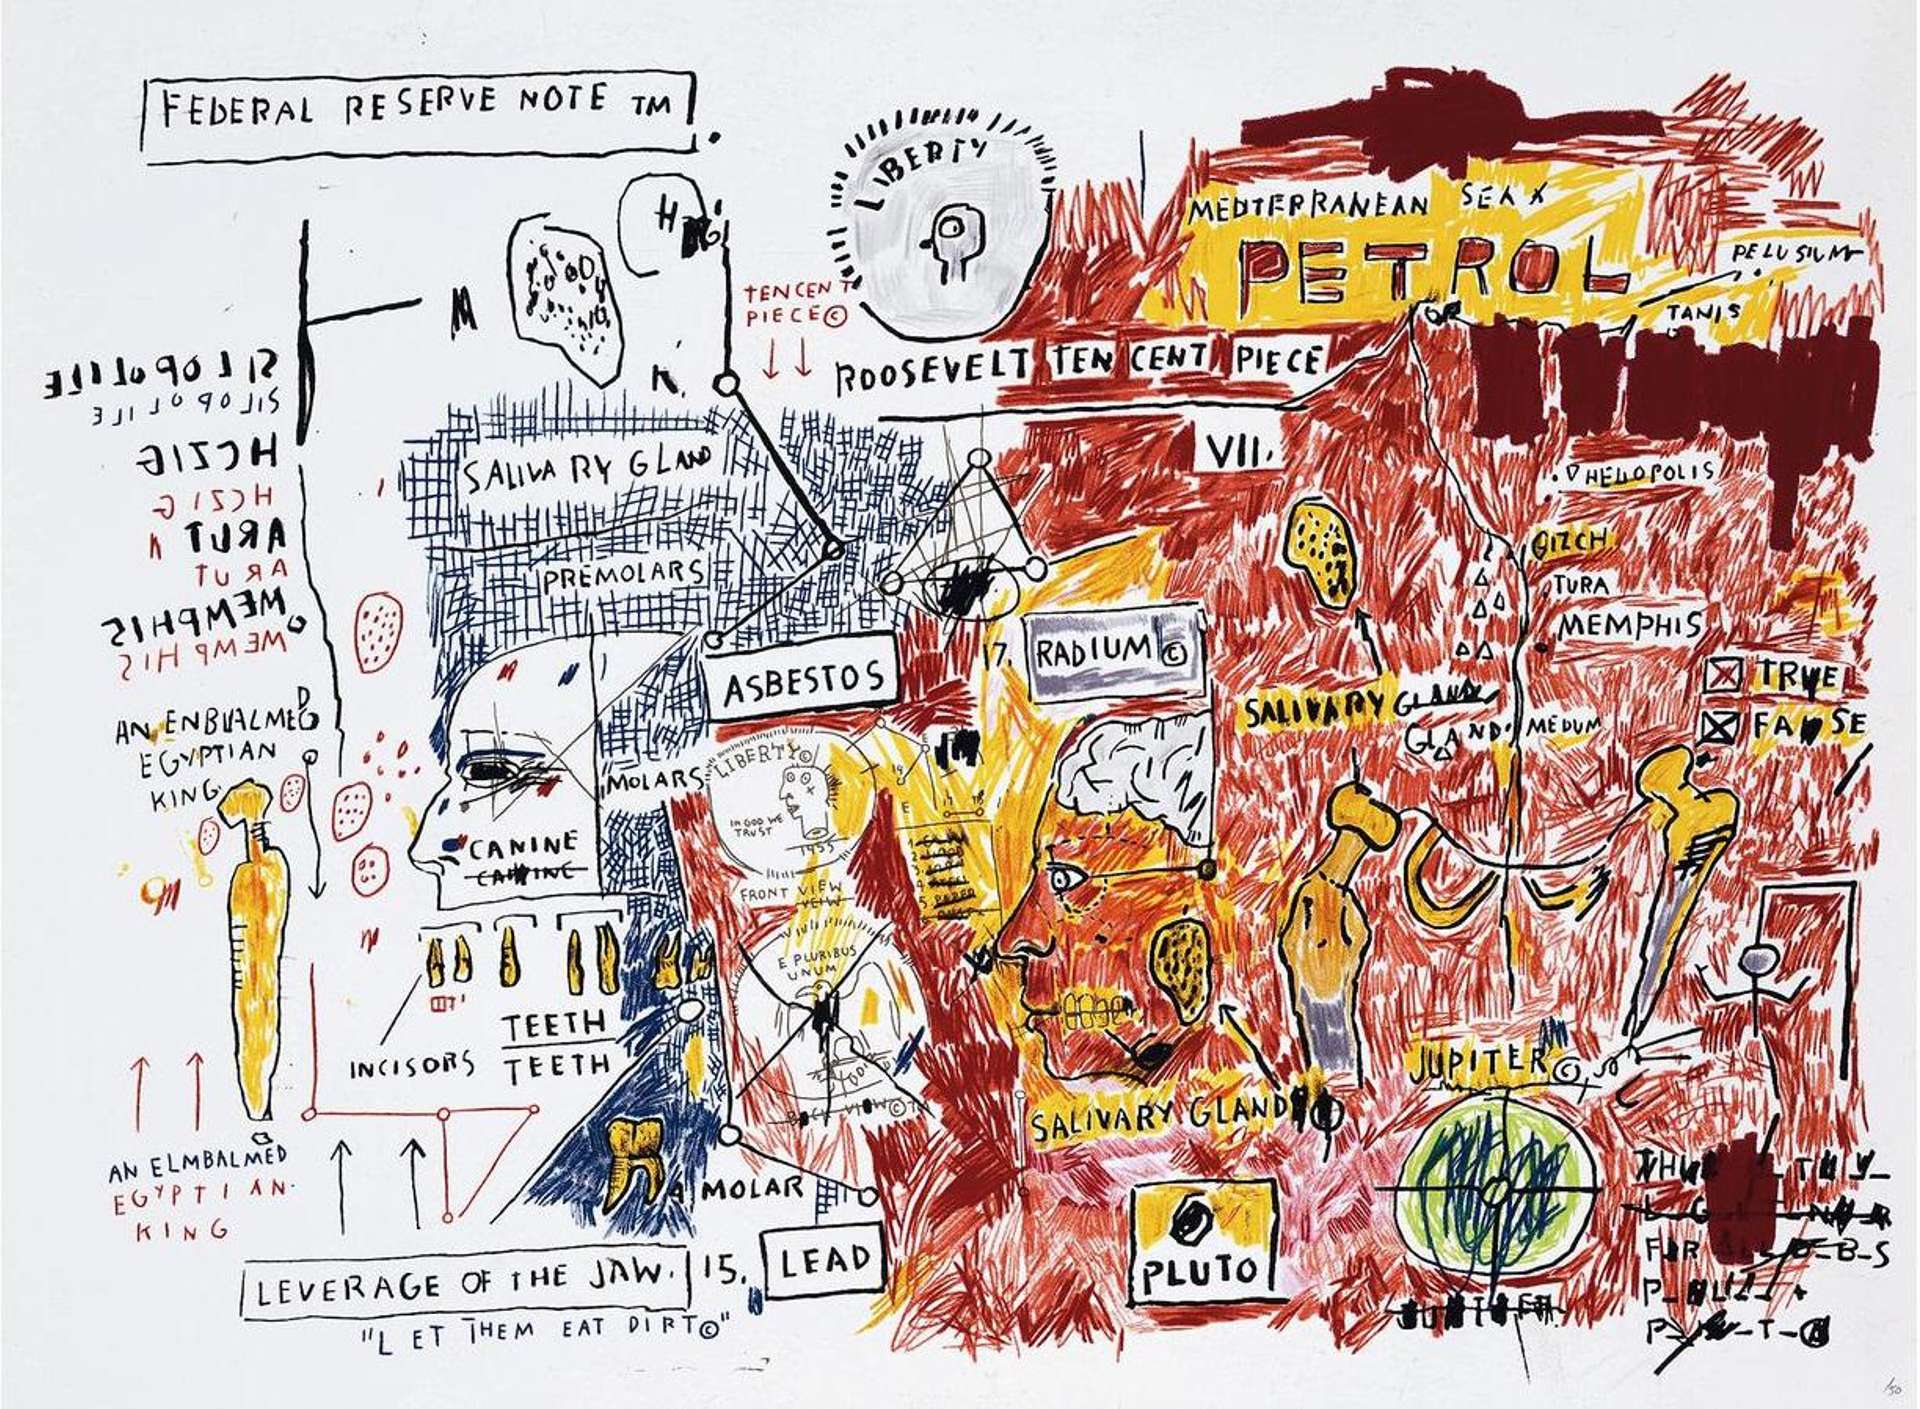 An image of the artwork Liberty by Jean-Michel Basquiat. It shows several motifs including coins and petrol. The right side of the painting is depicted in reds and yellows, and features Basquiat's signature scribbled words including "Asbestos" and "Radium".